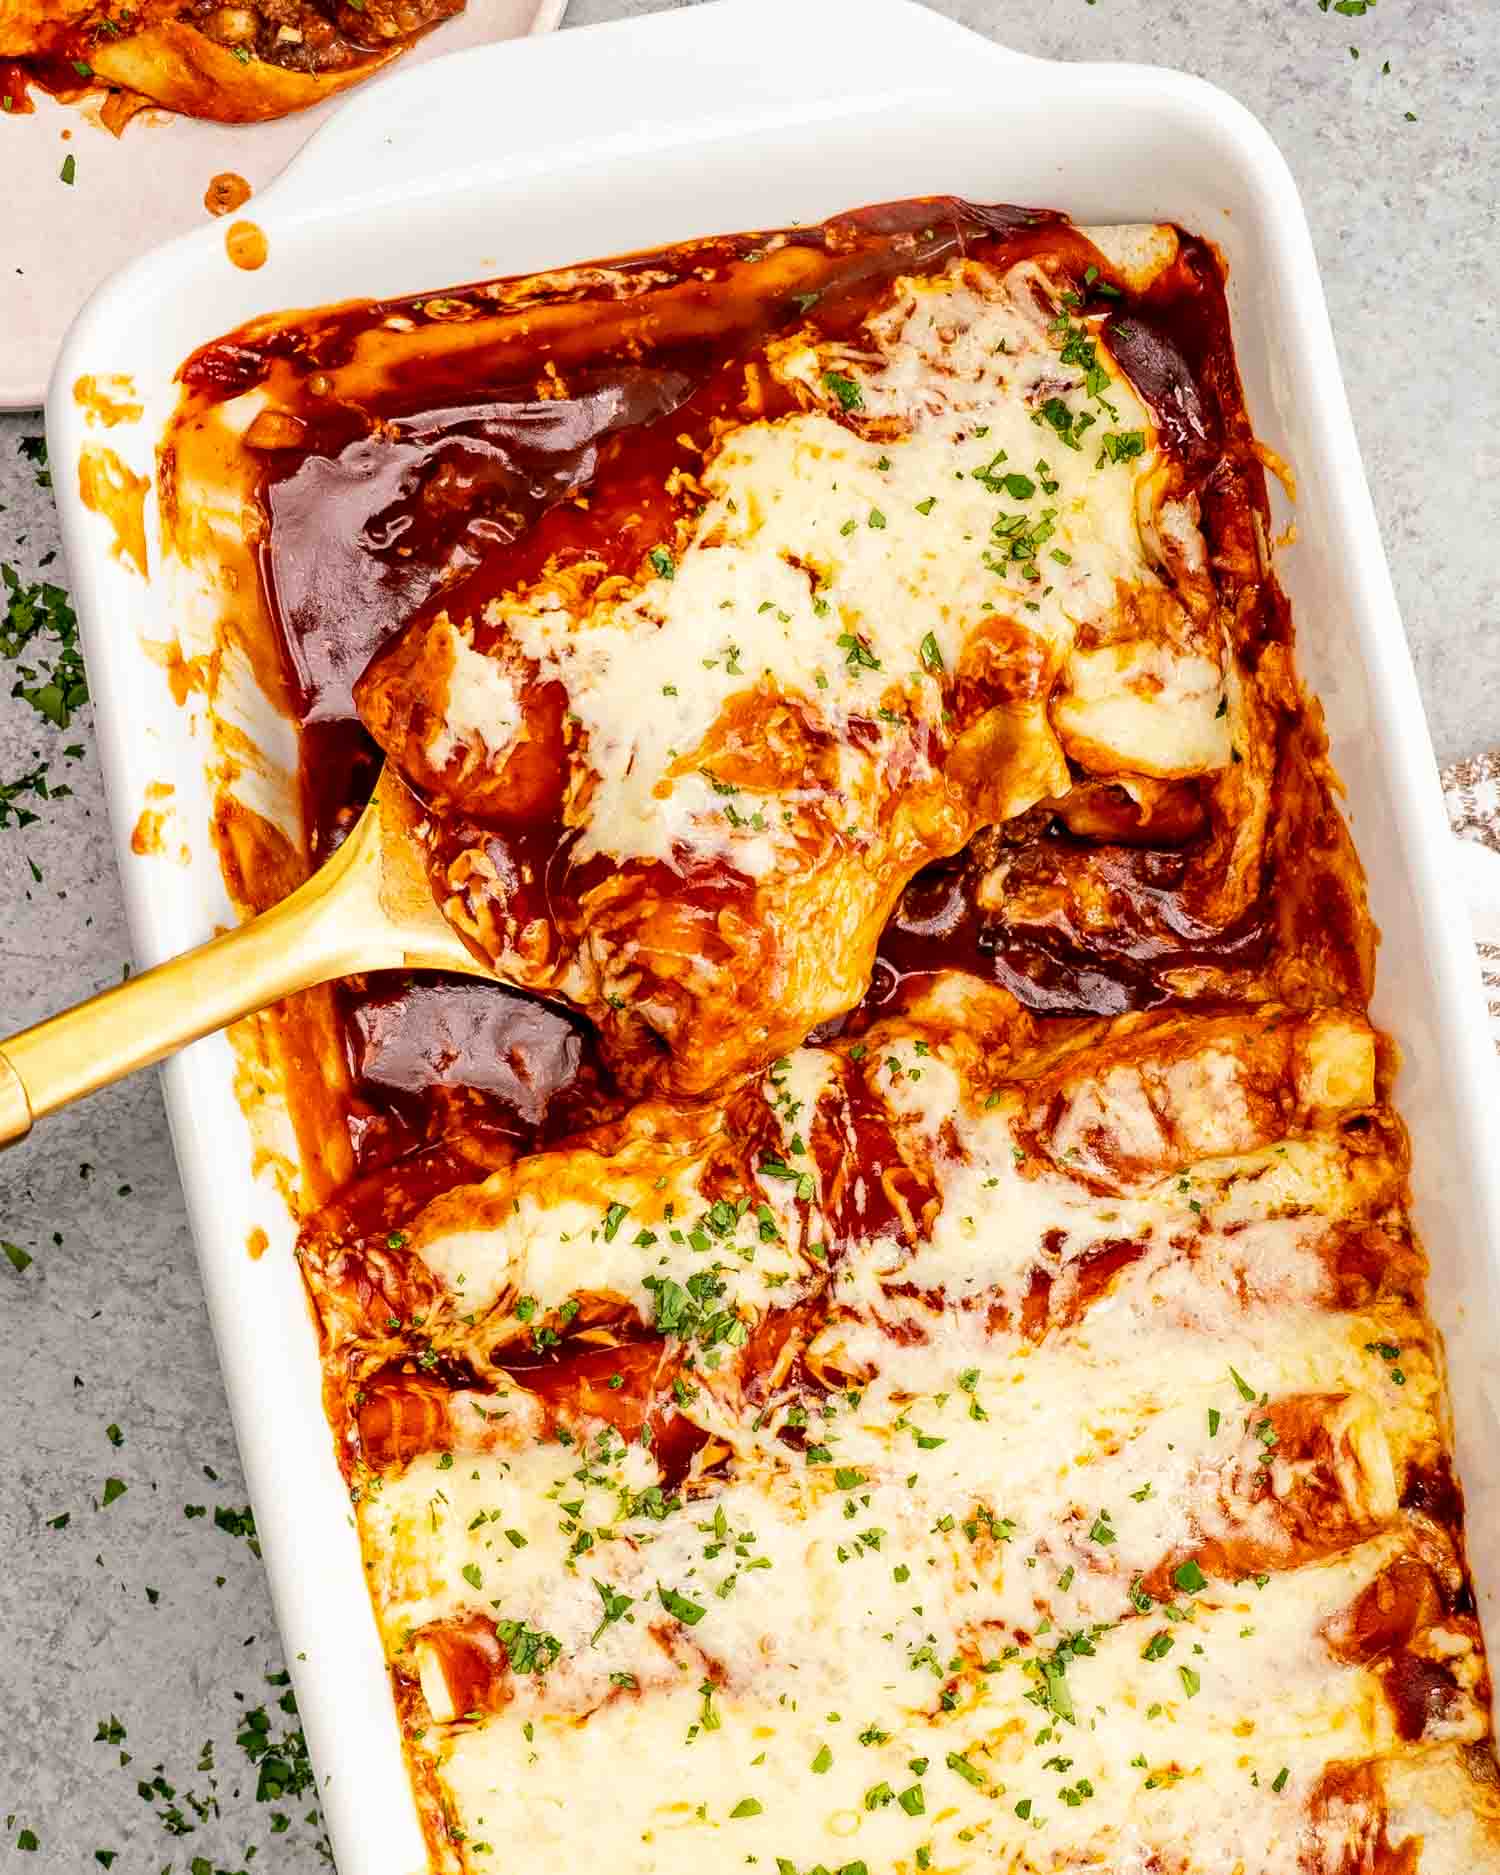 freshly baked cheesy beef enchiladas in a white casserole dish garnished with fresh cilantro.